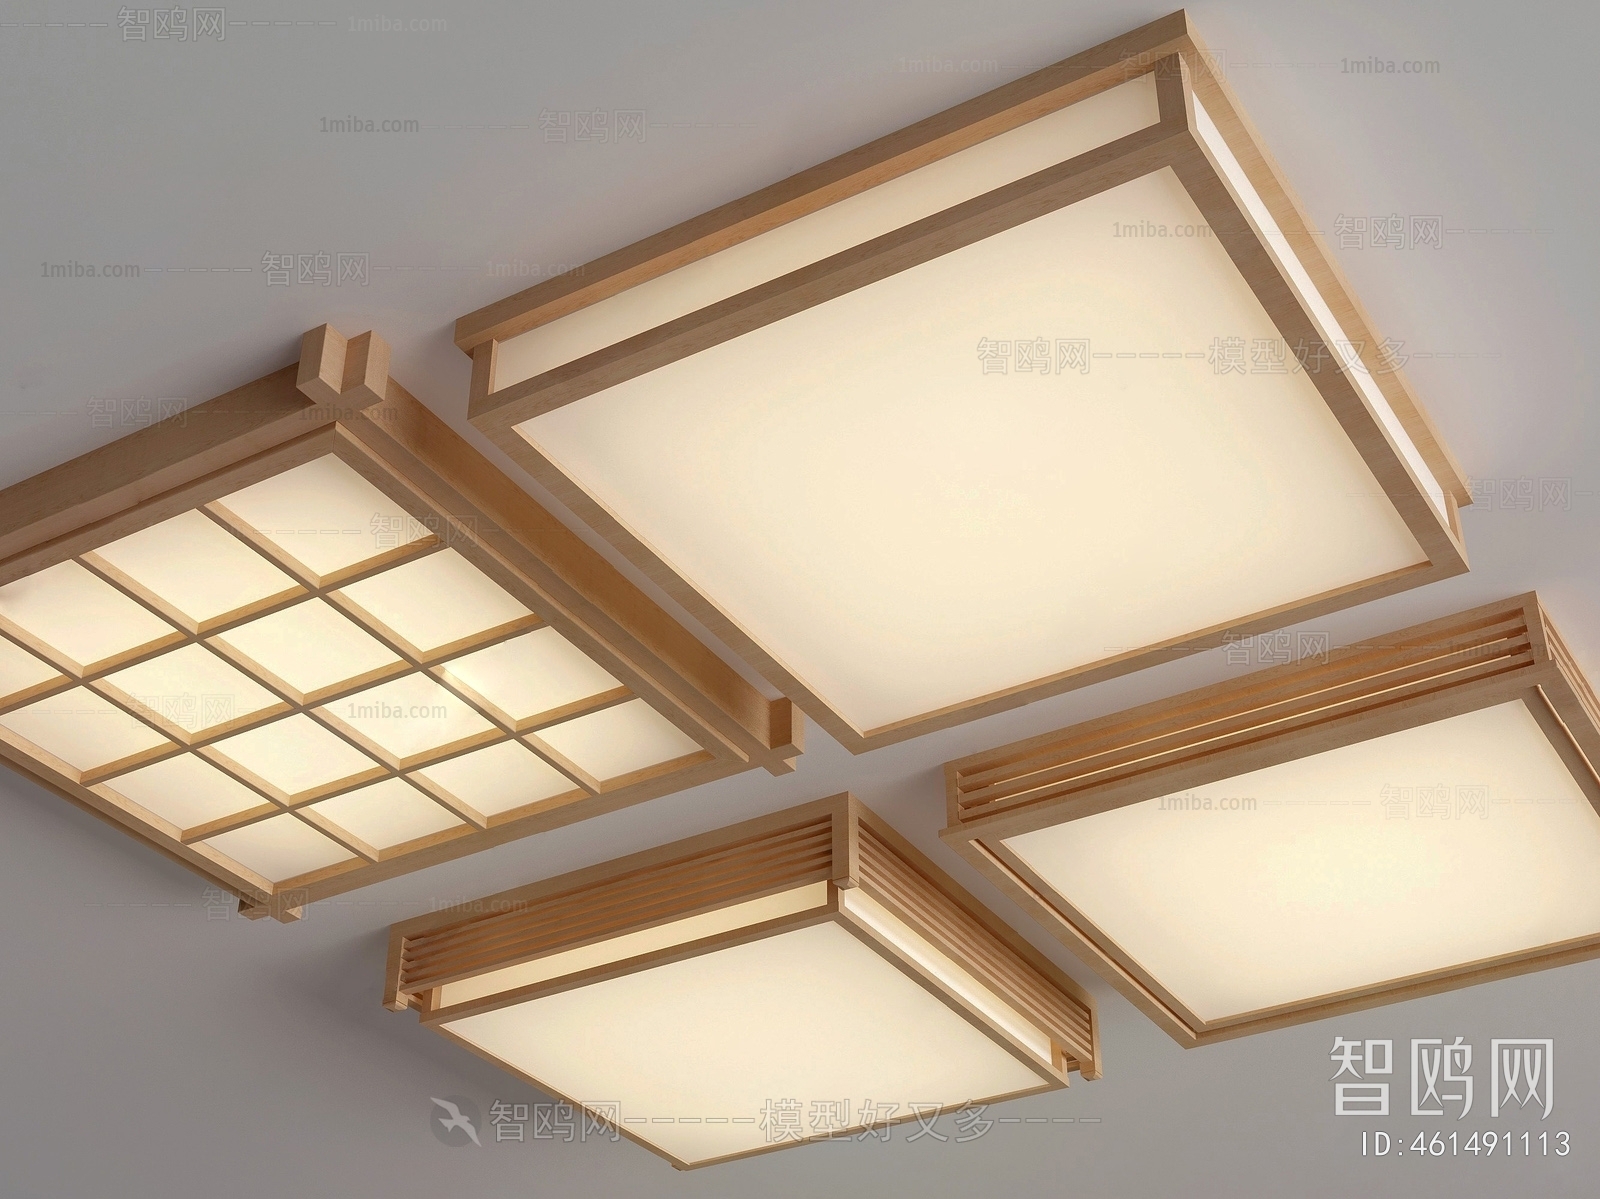 Japanese Style Ceiling Ceiling Lamp